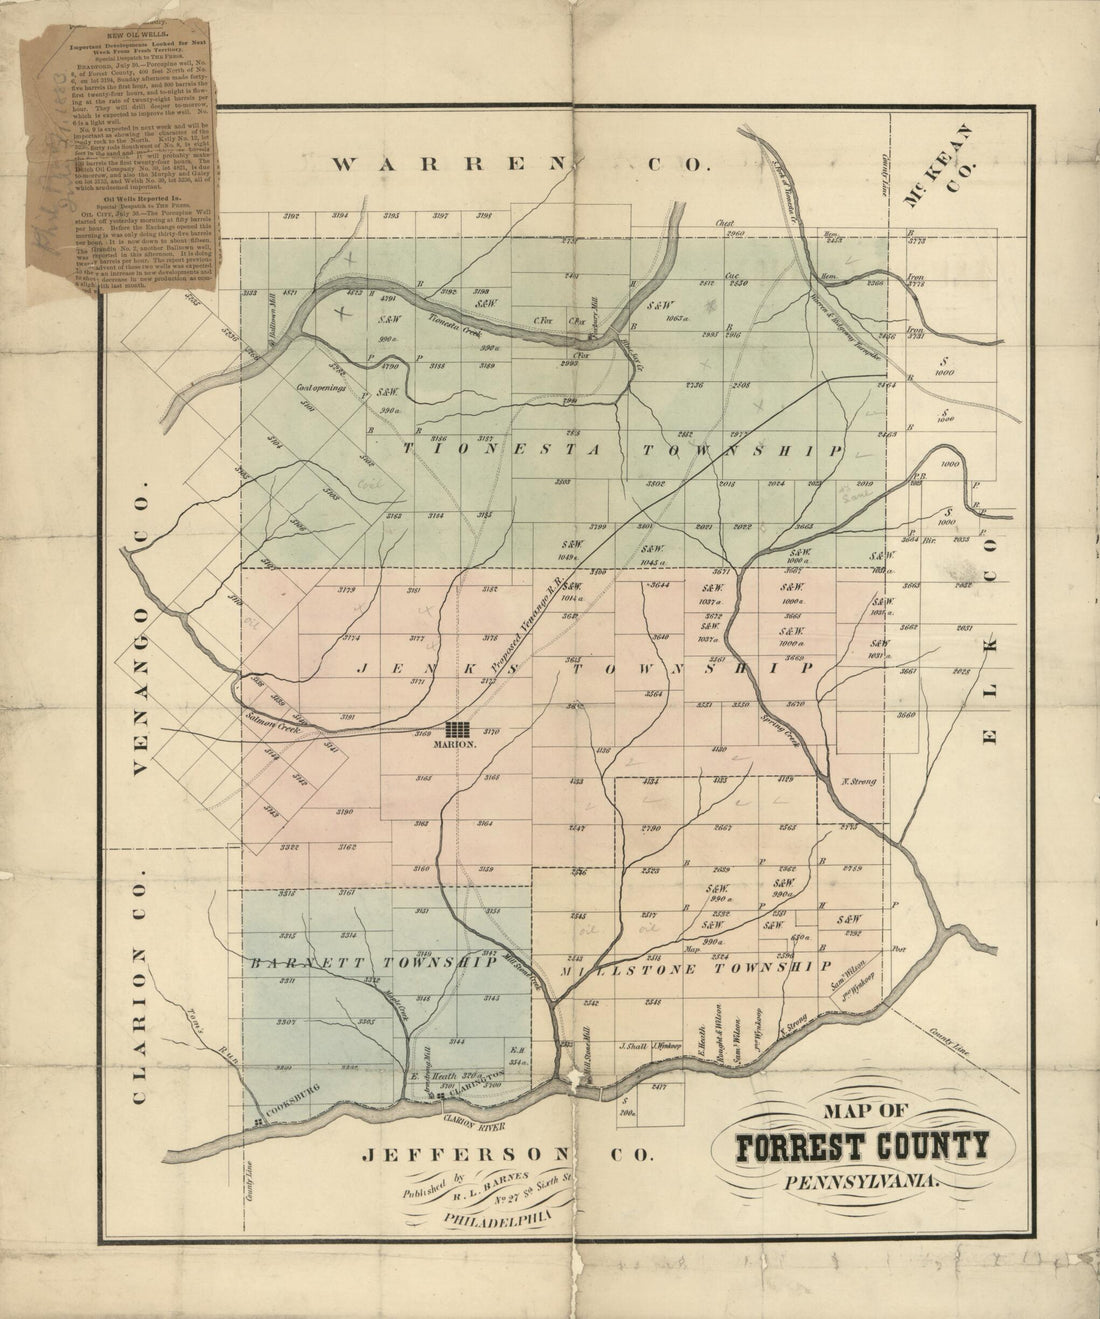 This old map of Map of Forest County, Pennsylvania from 1858 was created by Rufus L. Barnes in 1858